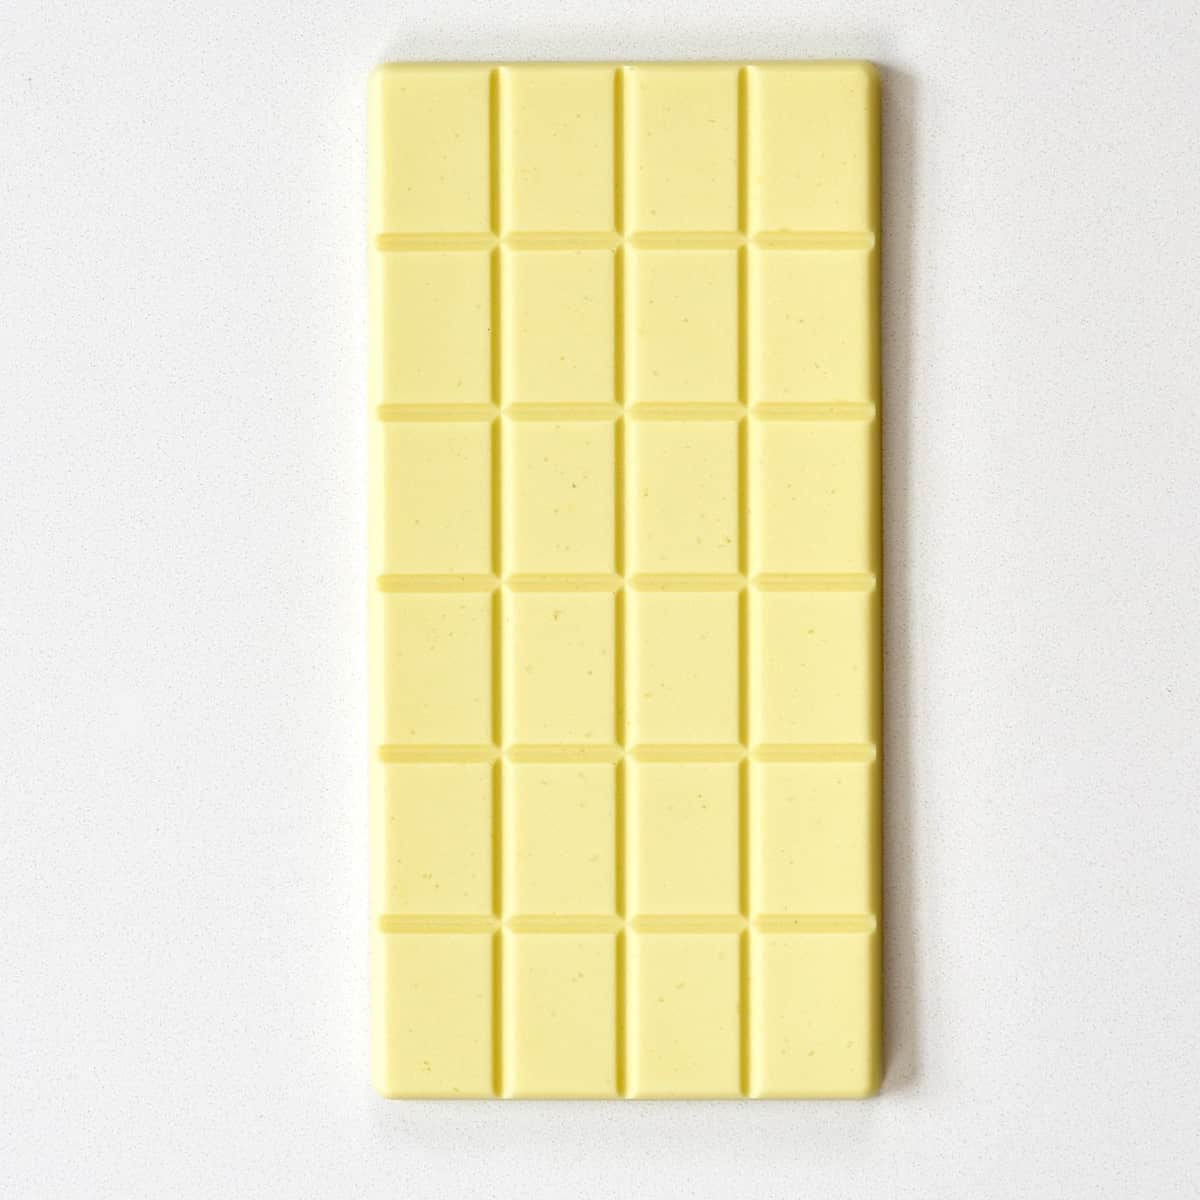 How To Make White Chocolate - Alphafoodie